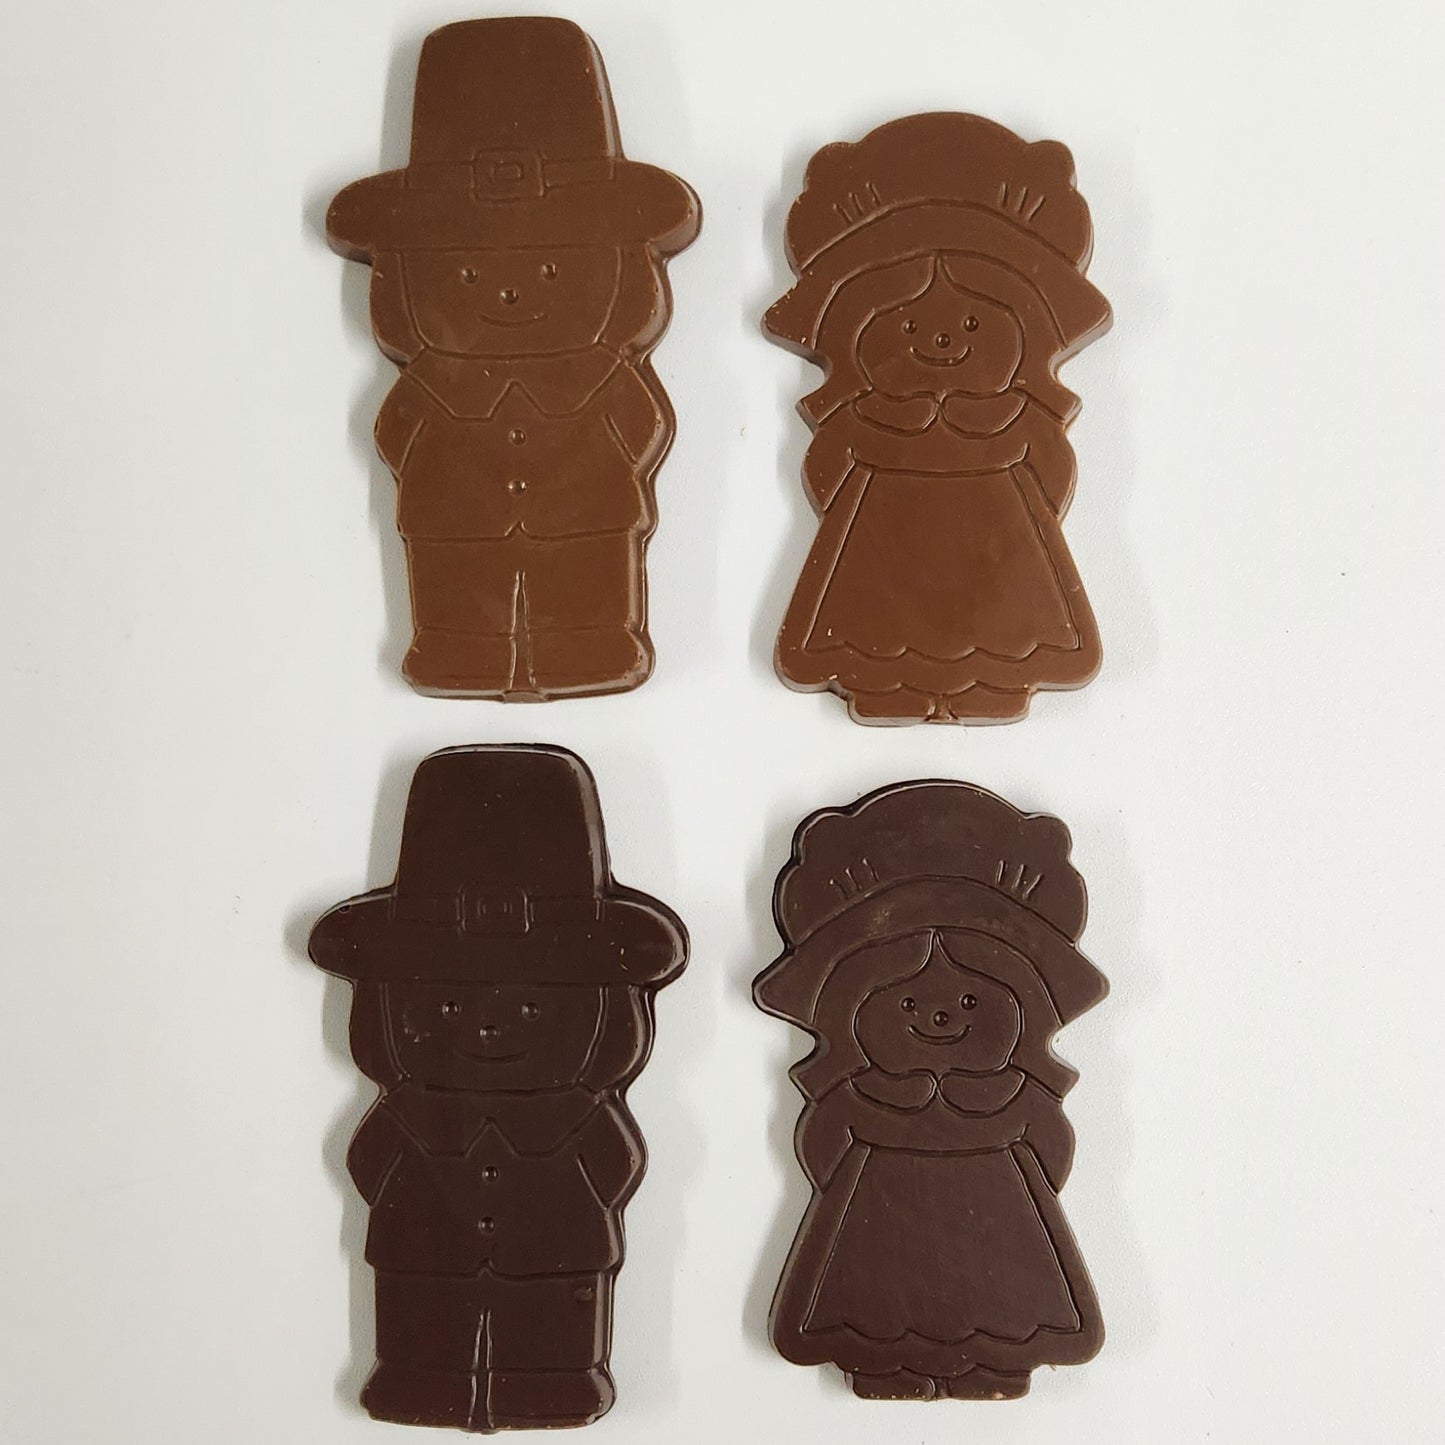 Our decadently delicious milk or dark chocolate favors, shaped as adorable pilgrims. 